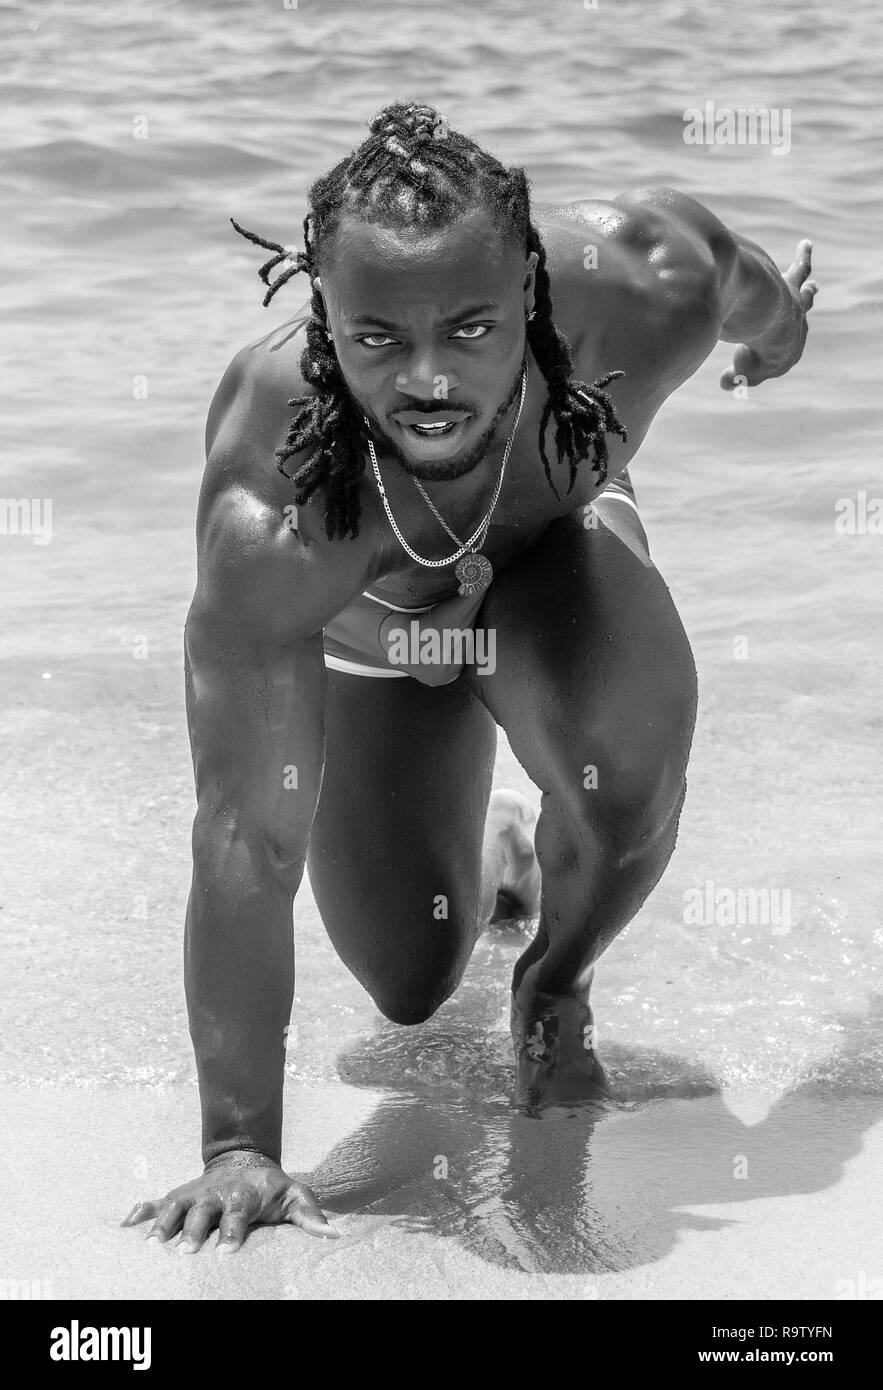 Black and white photo of a young, handsome, muscular, shirtless African American man posing with one of his knees in the send, on Yelapa beach near Pu Stock Photo